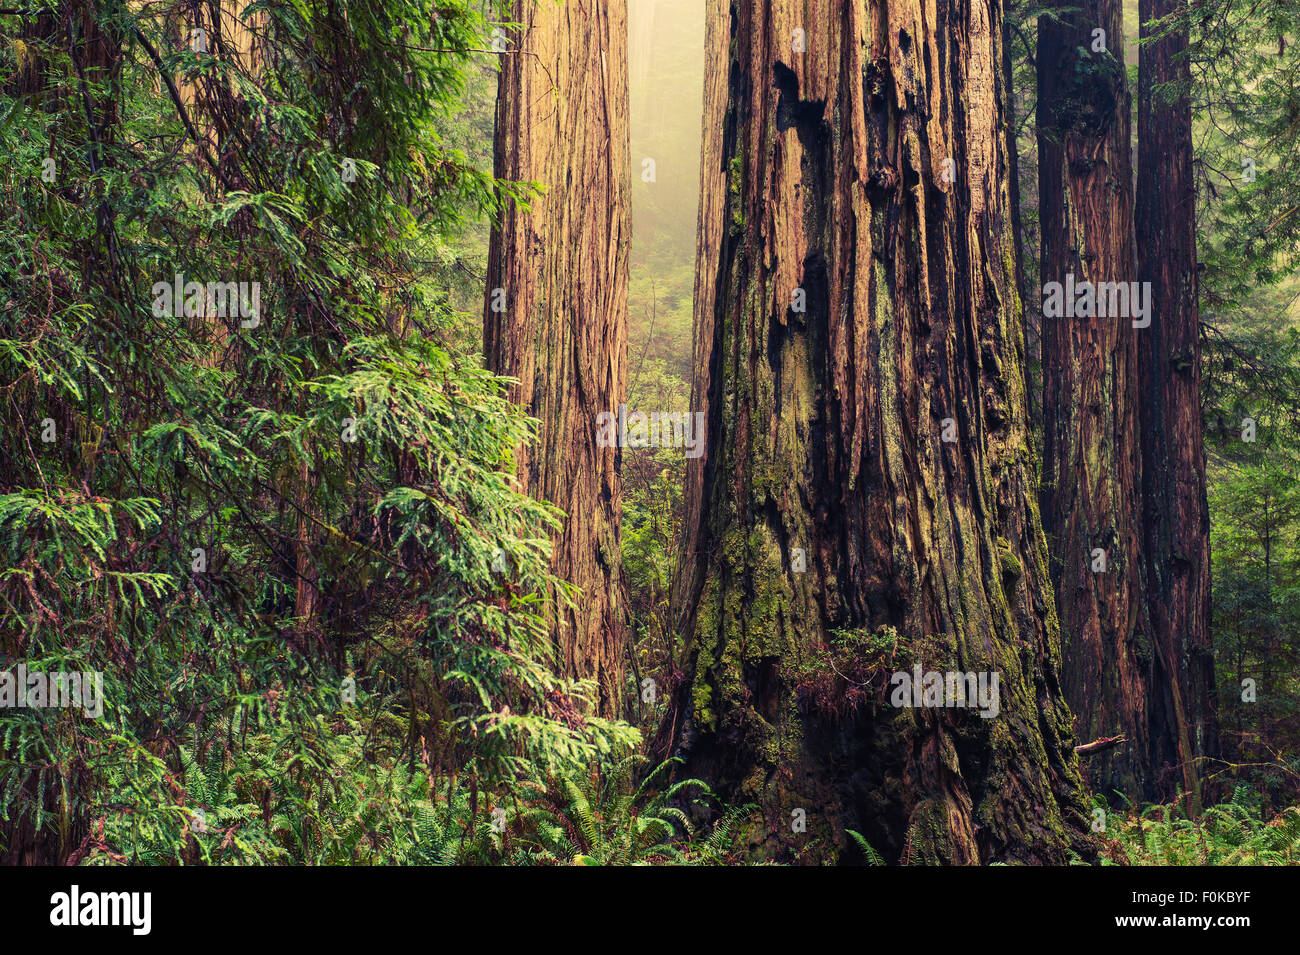 Thousands of Years Old Redwood Trees in California Redwood Forest. Stock Photo